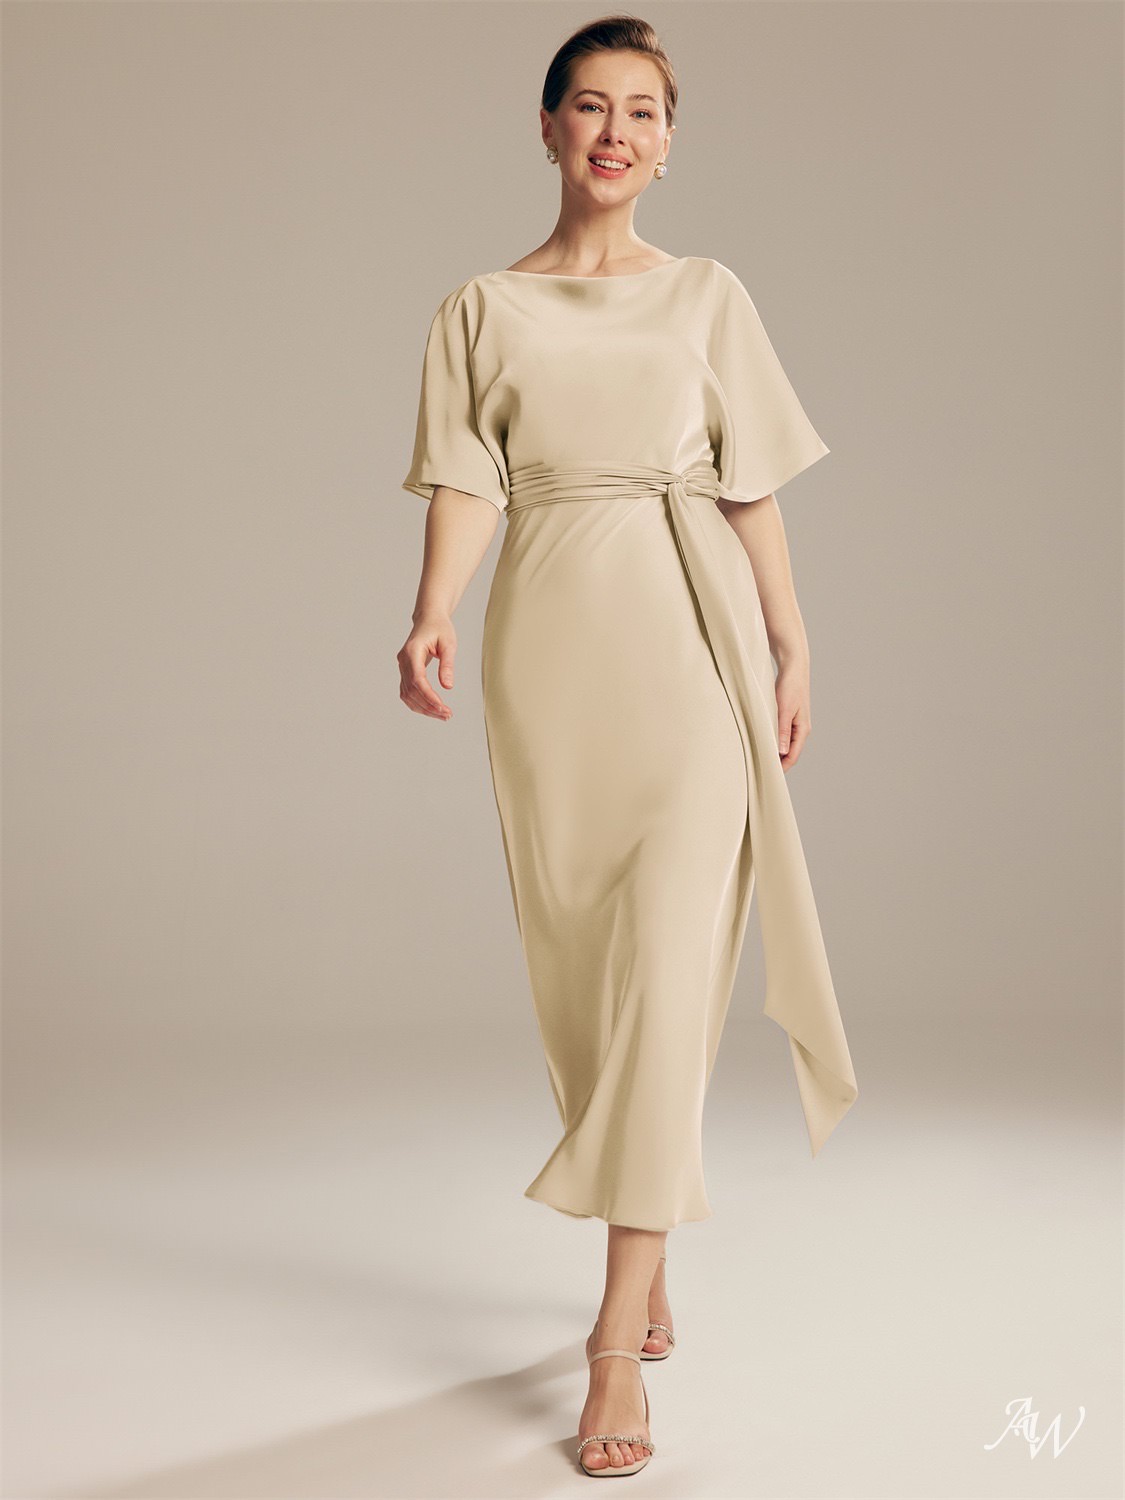 Mother of The Bride Dress with sleeves - Mother of The Bride Dress with sleeves - AW Bridal RomulaAW Bridal Romula